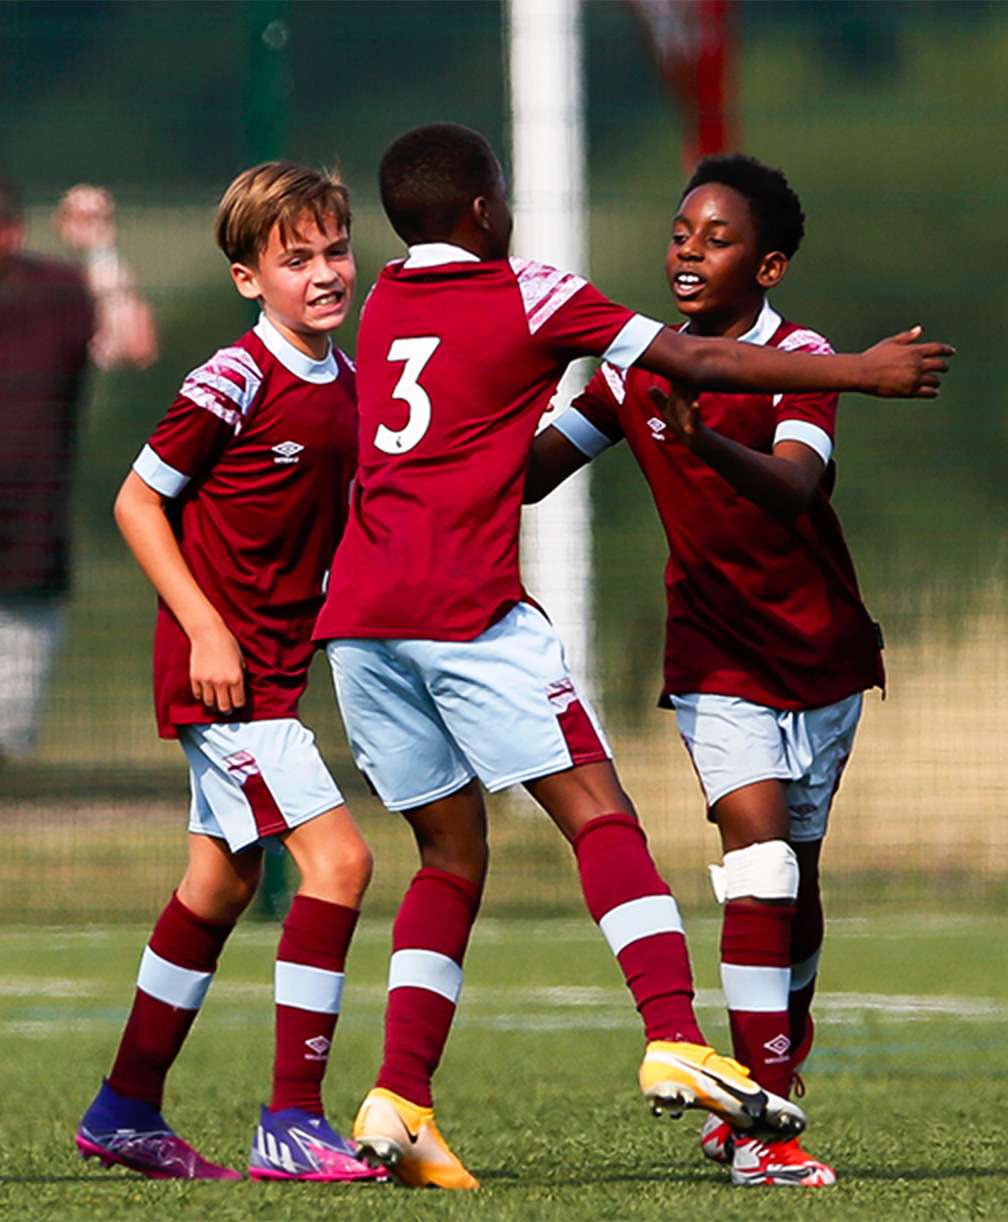 Six male football players celebrate on a pitch. They're around 12 years old.